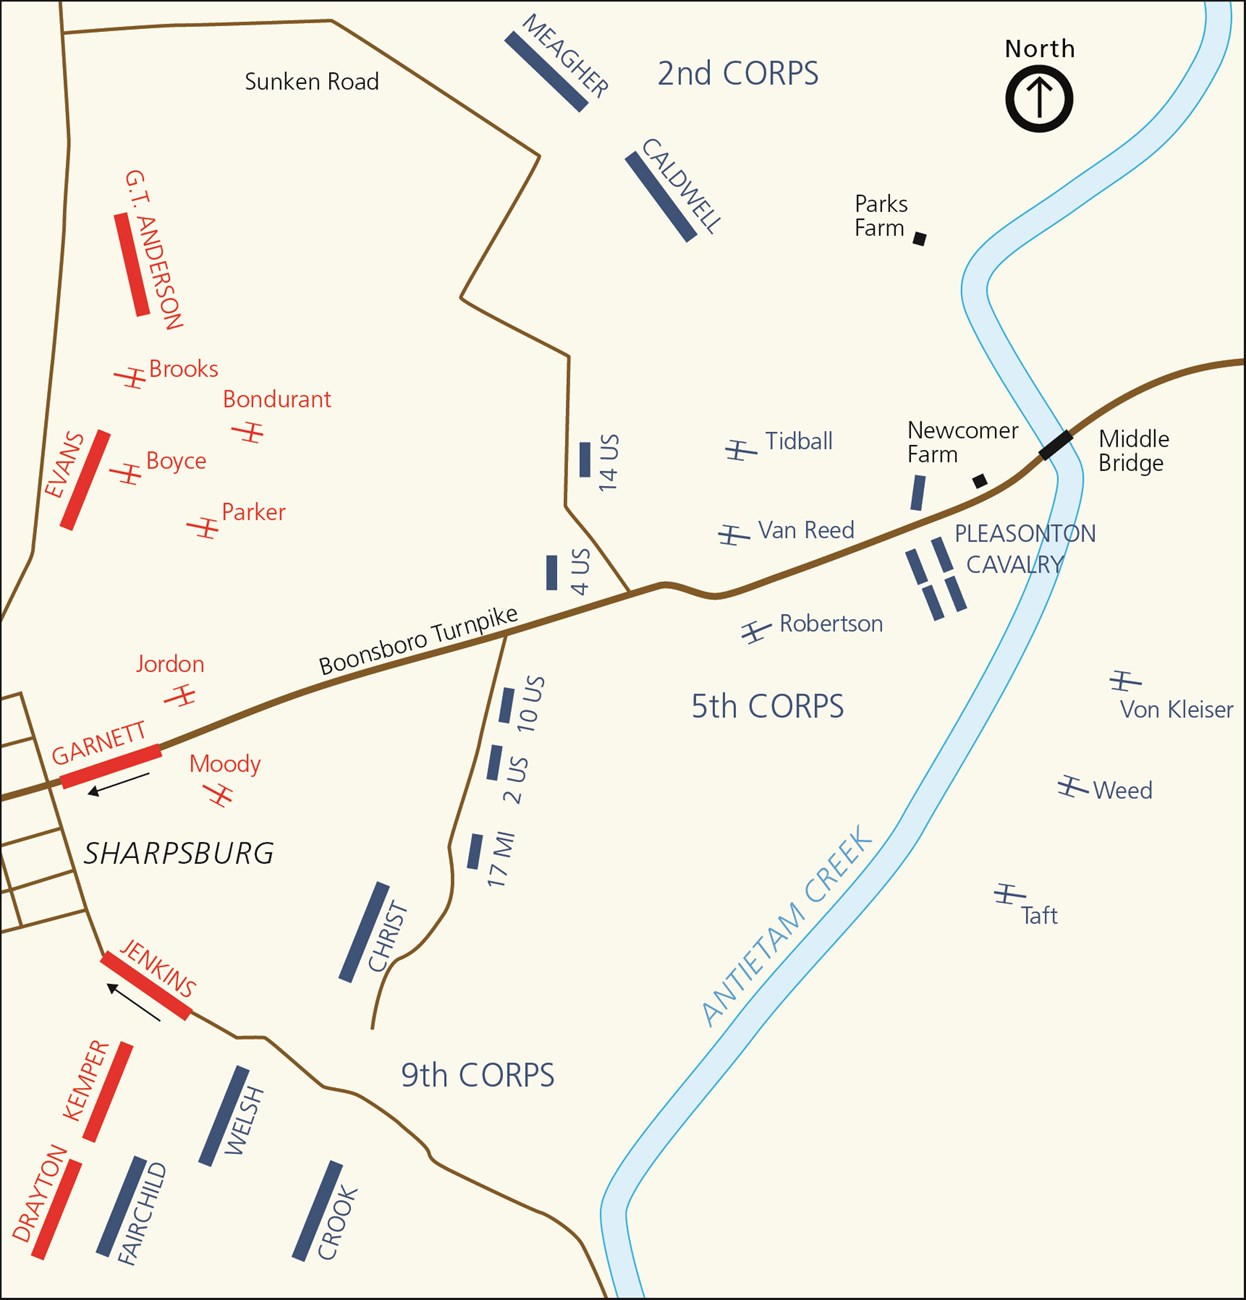 Battle Map at the Middle Bridge at approximately 4:00 p.m.